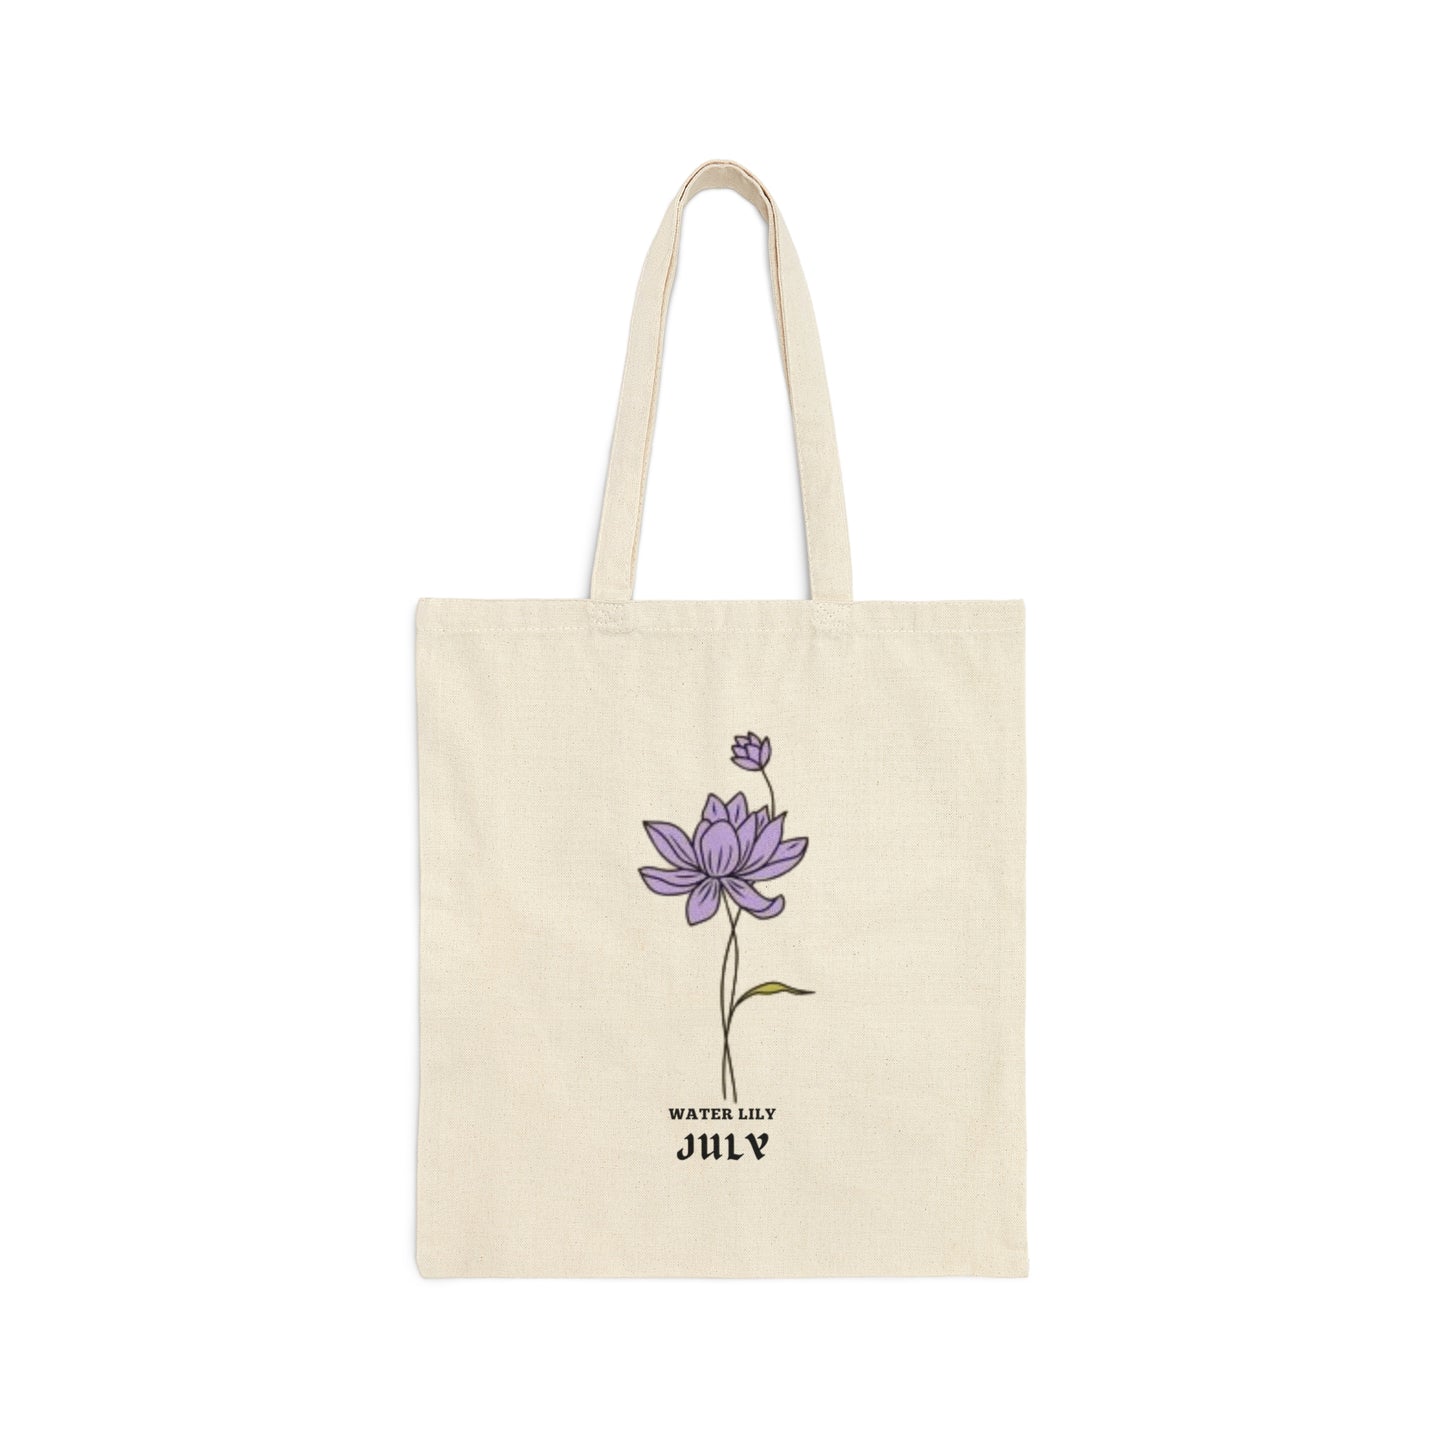 JULY BIRTH MONTH FLOWER TOTE BAG GIFT (WATER LILY)